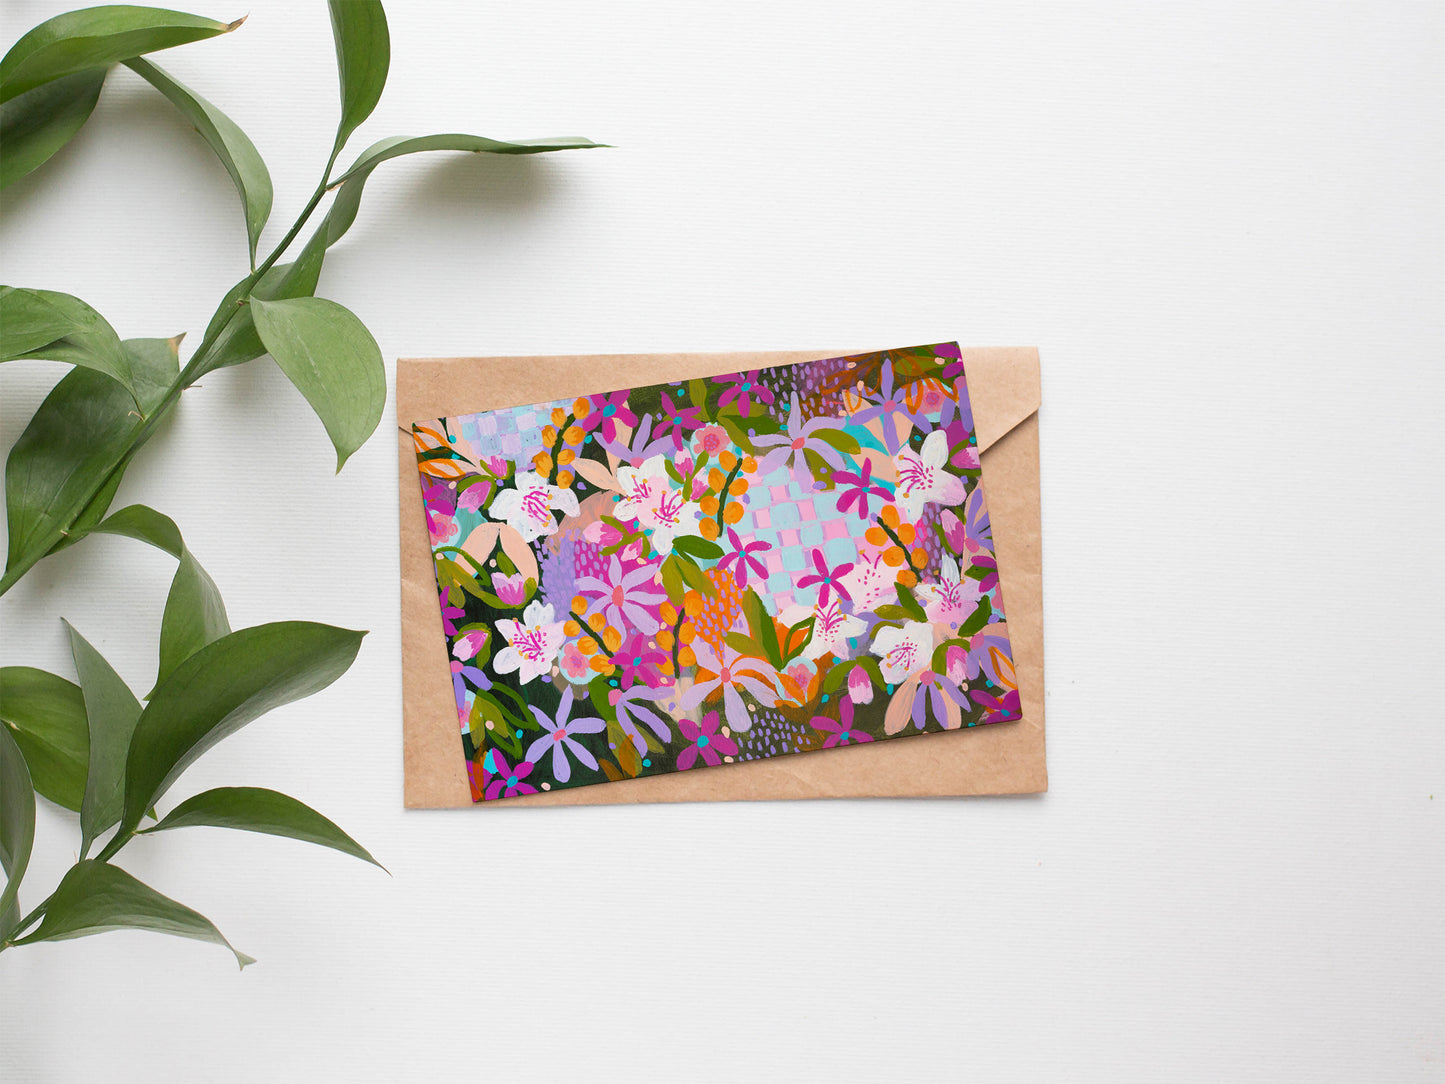 Greeting cards "Wildflowers Edition"